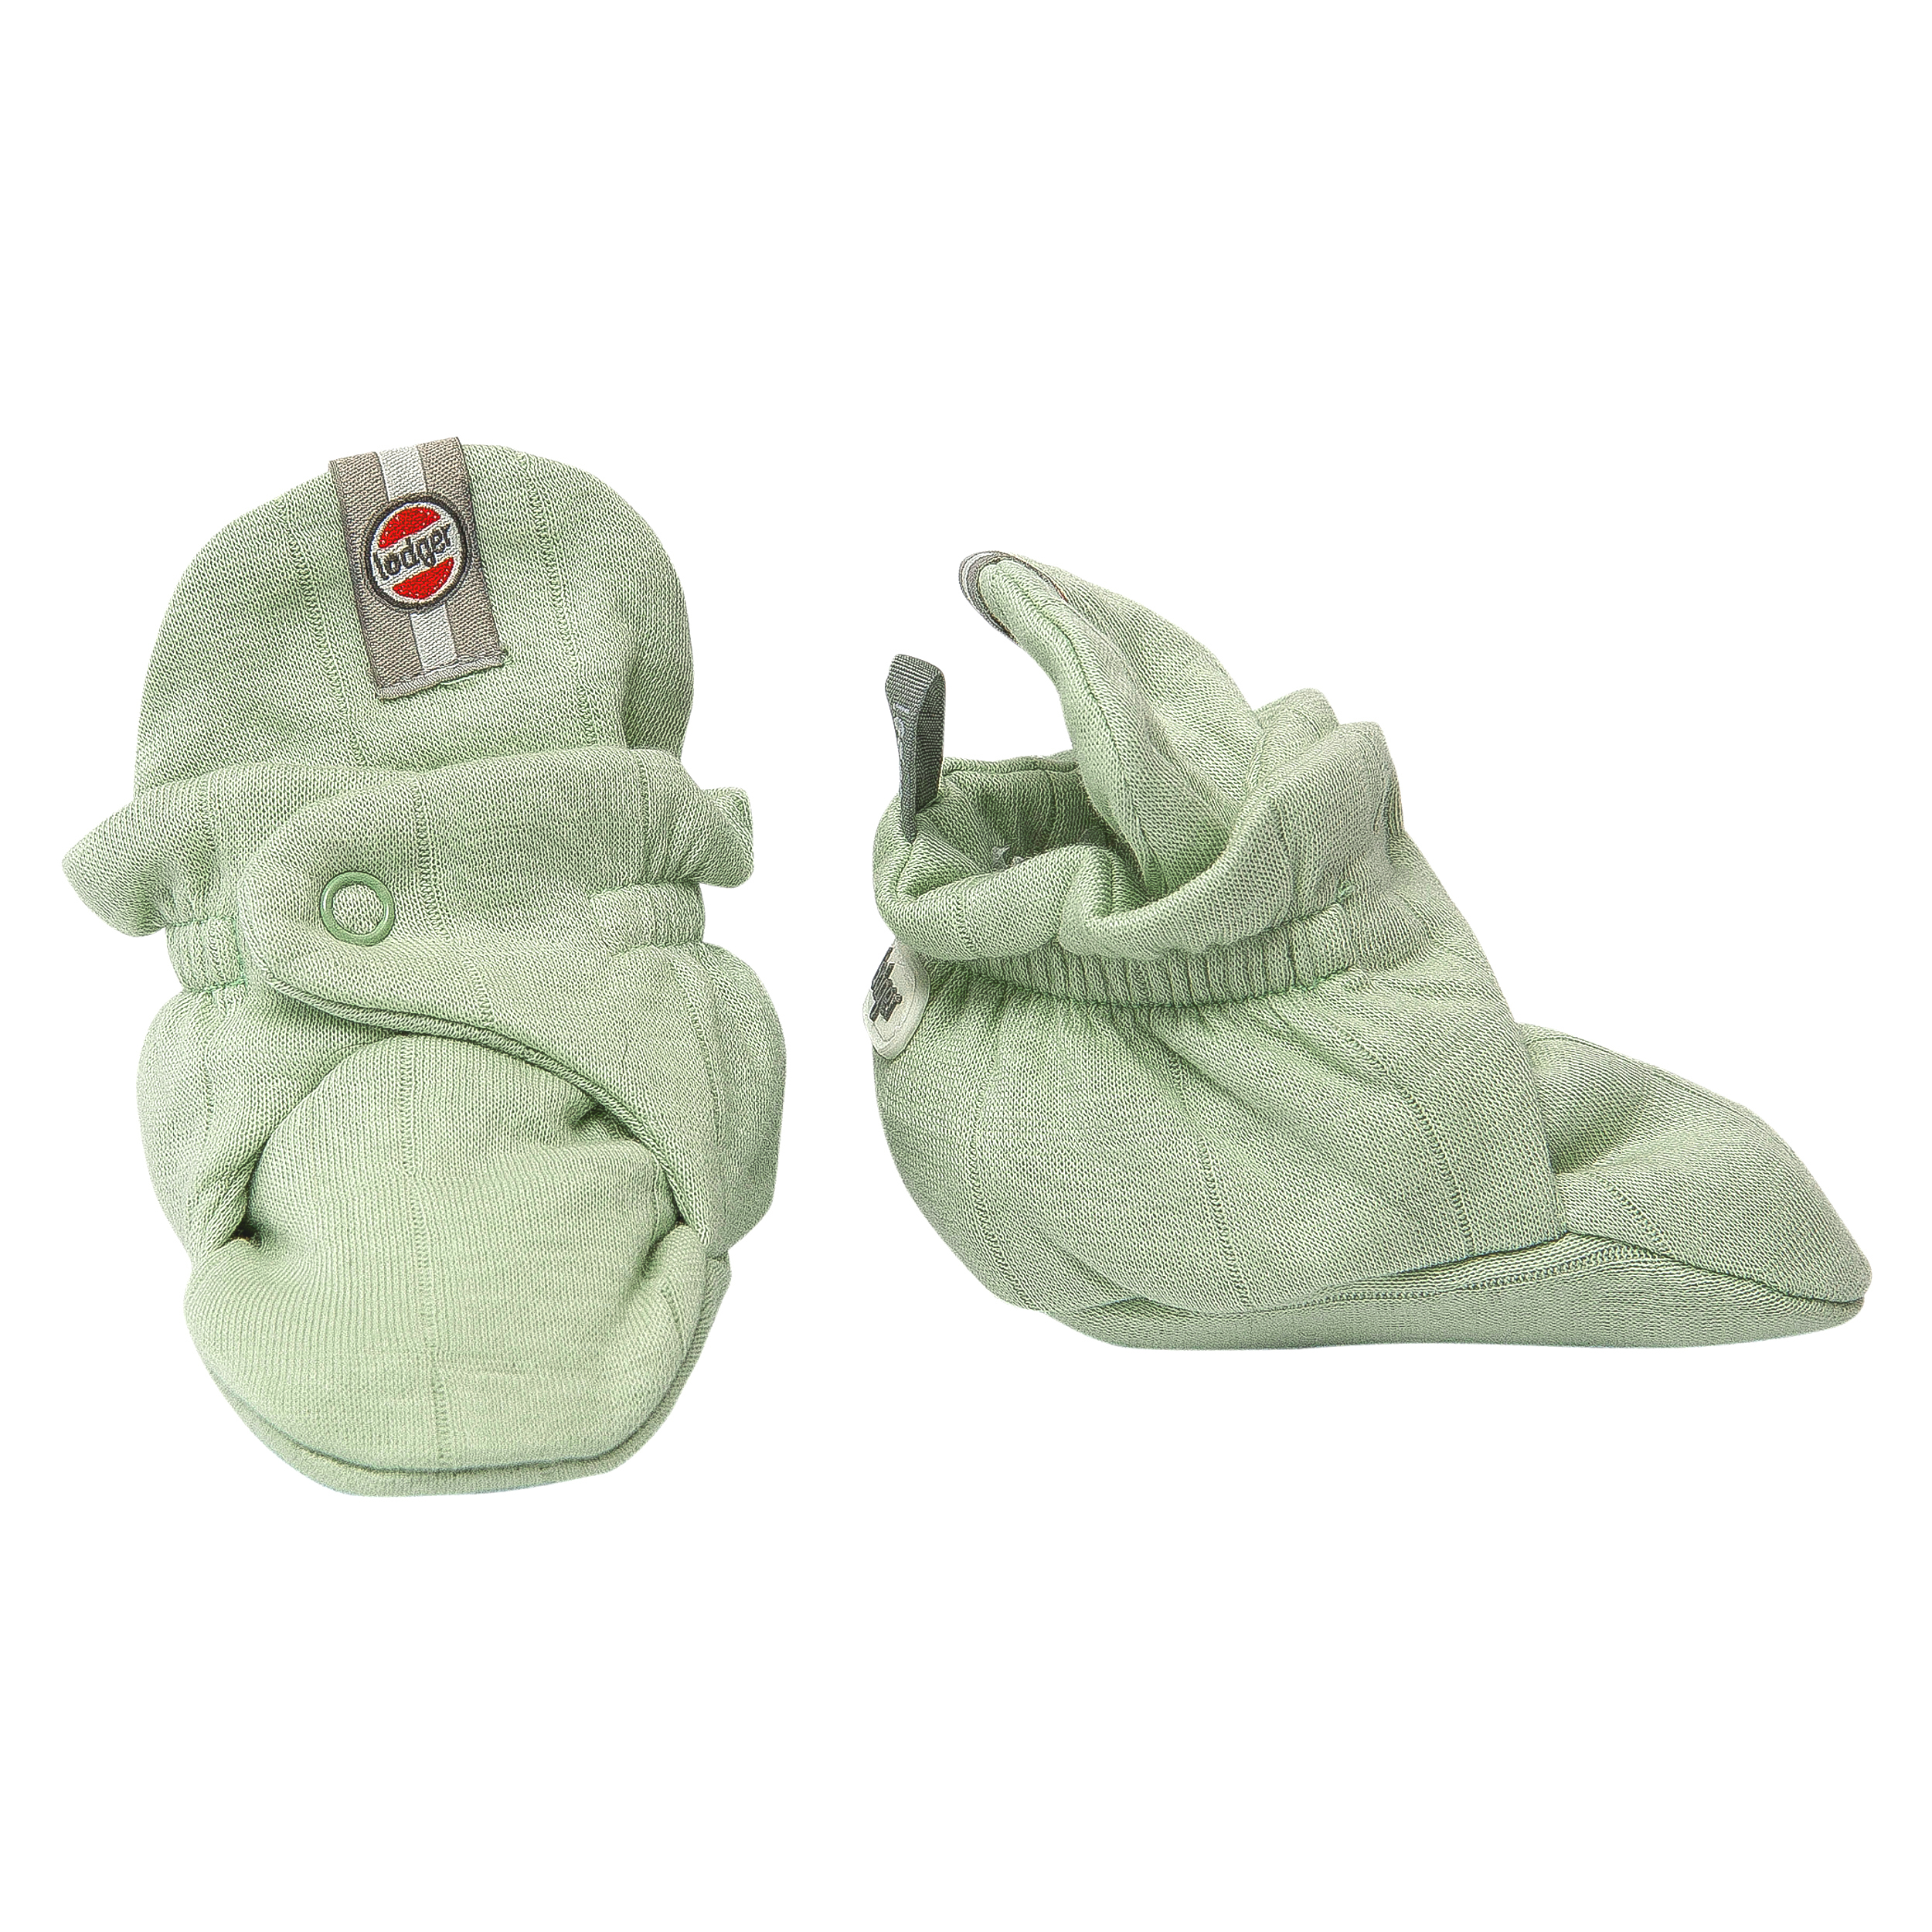 Baby slippers made of cotton with a 